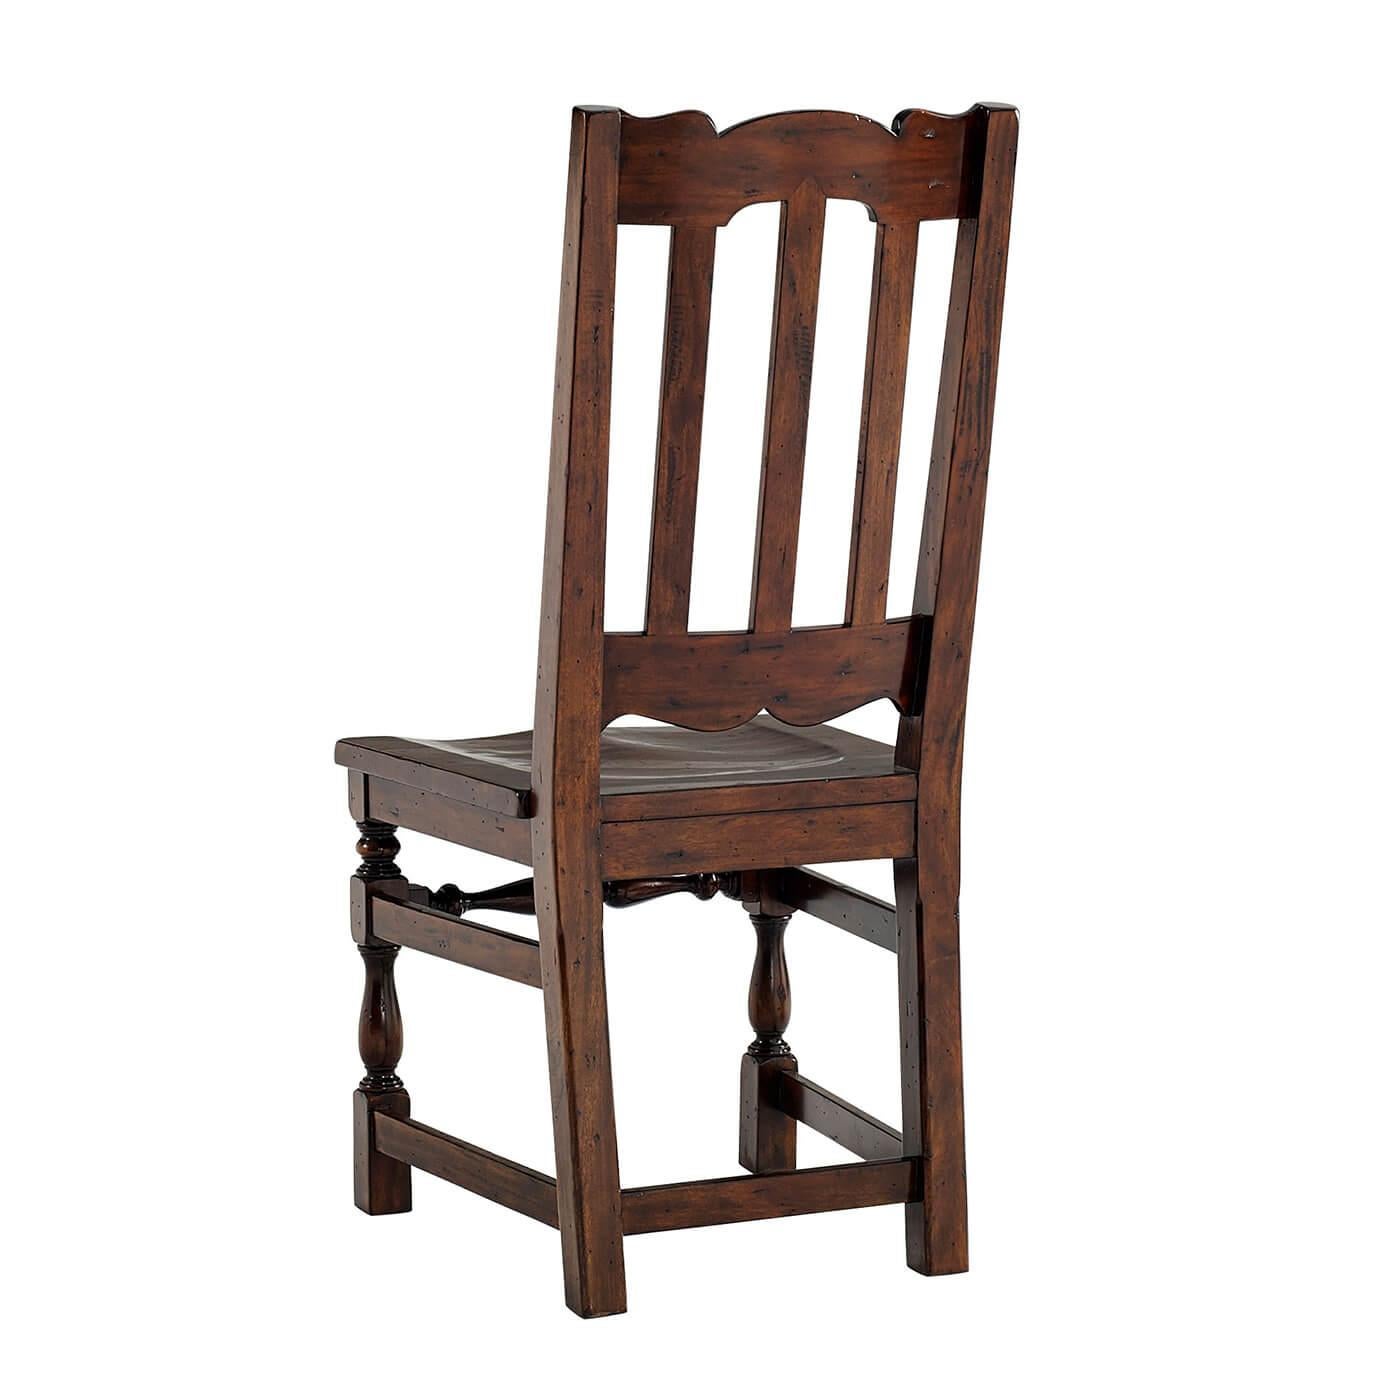 An early English Jacobean style antiqued wood side chair, the slatted back with an arched carved top rail, the solid seat on turned legs joined by stretchers. 

Dimensions: 19